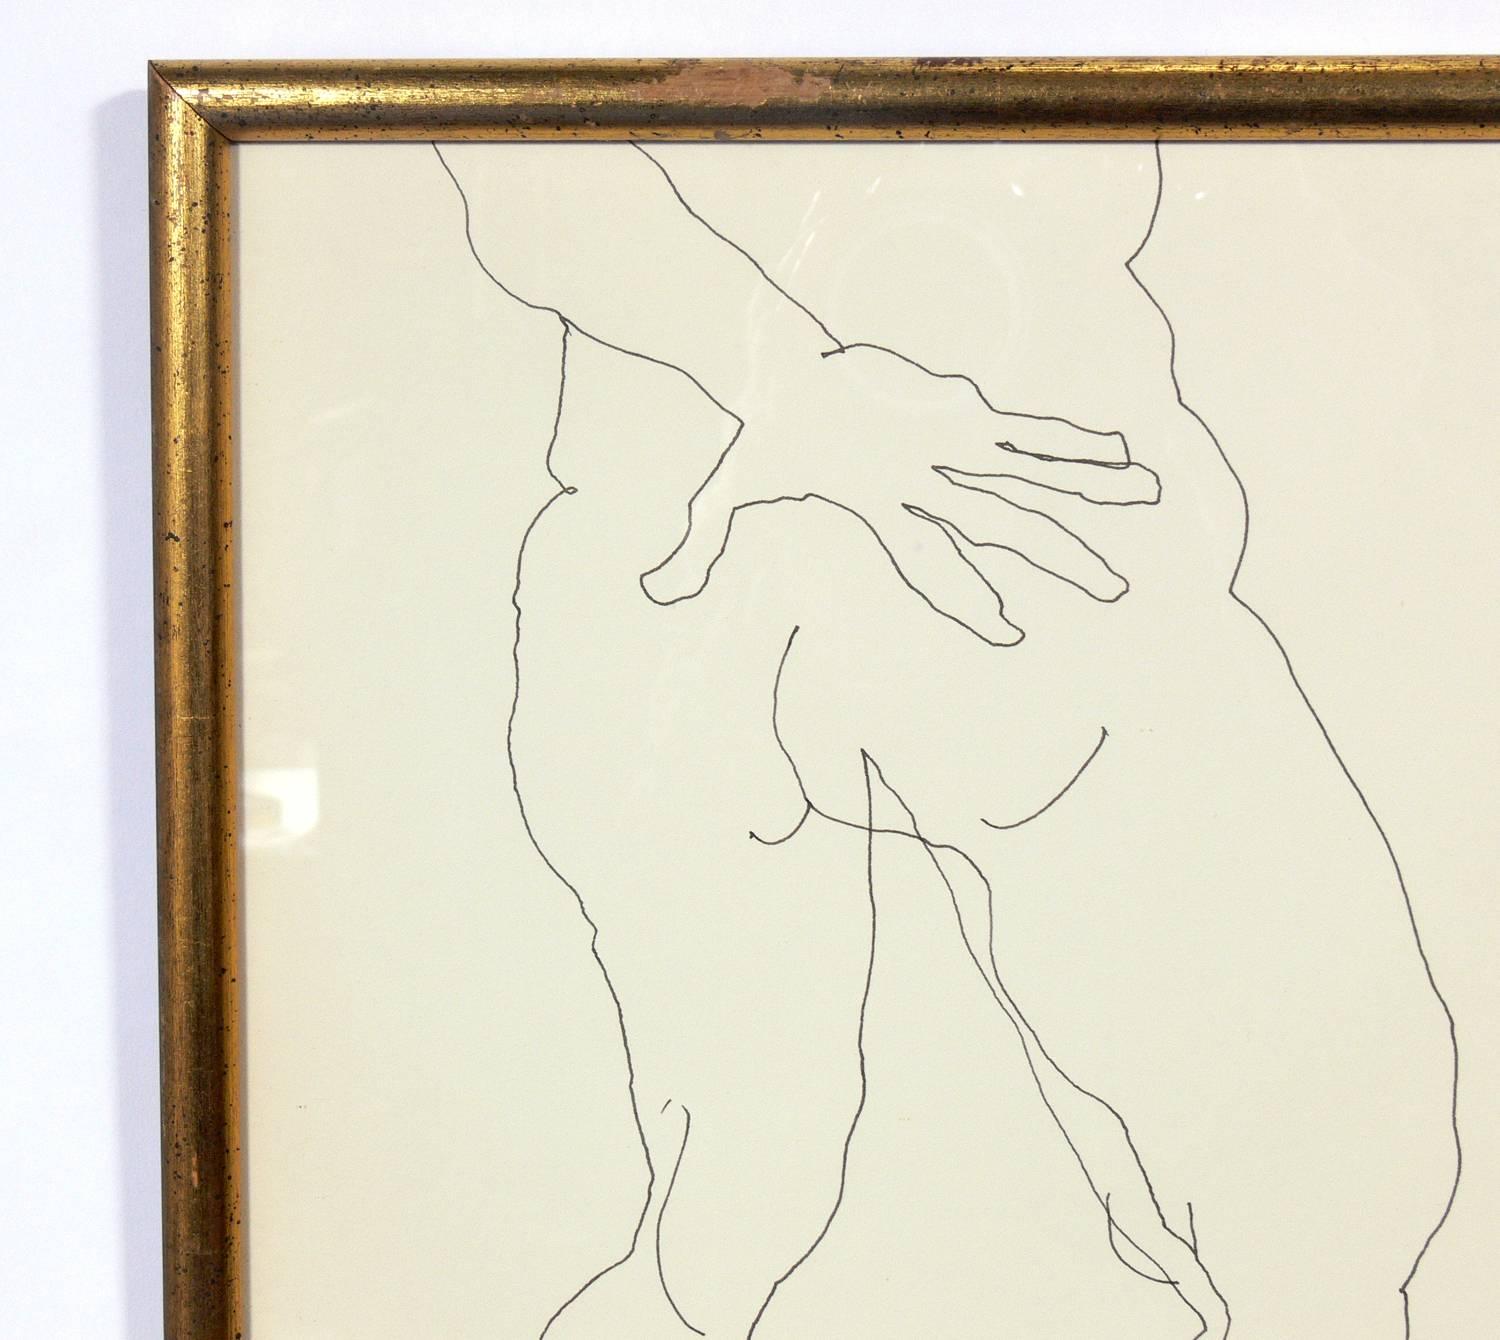 Selection of Figural Line Drawings or Gallery Wall by Miriam Kubach 1